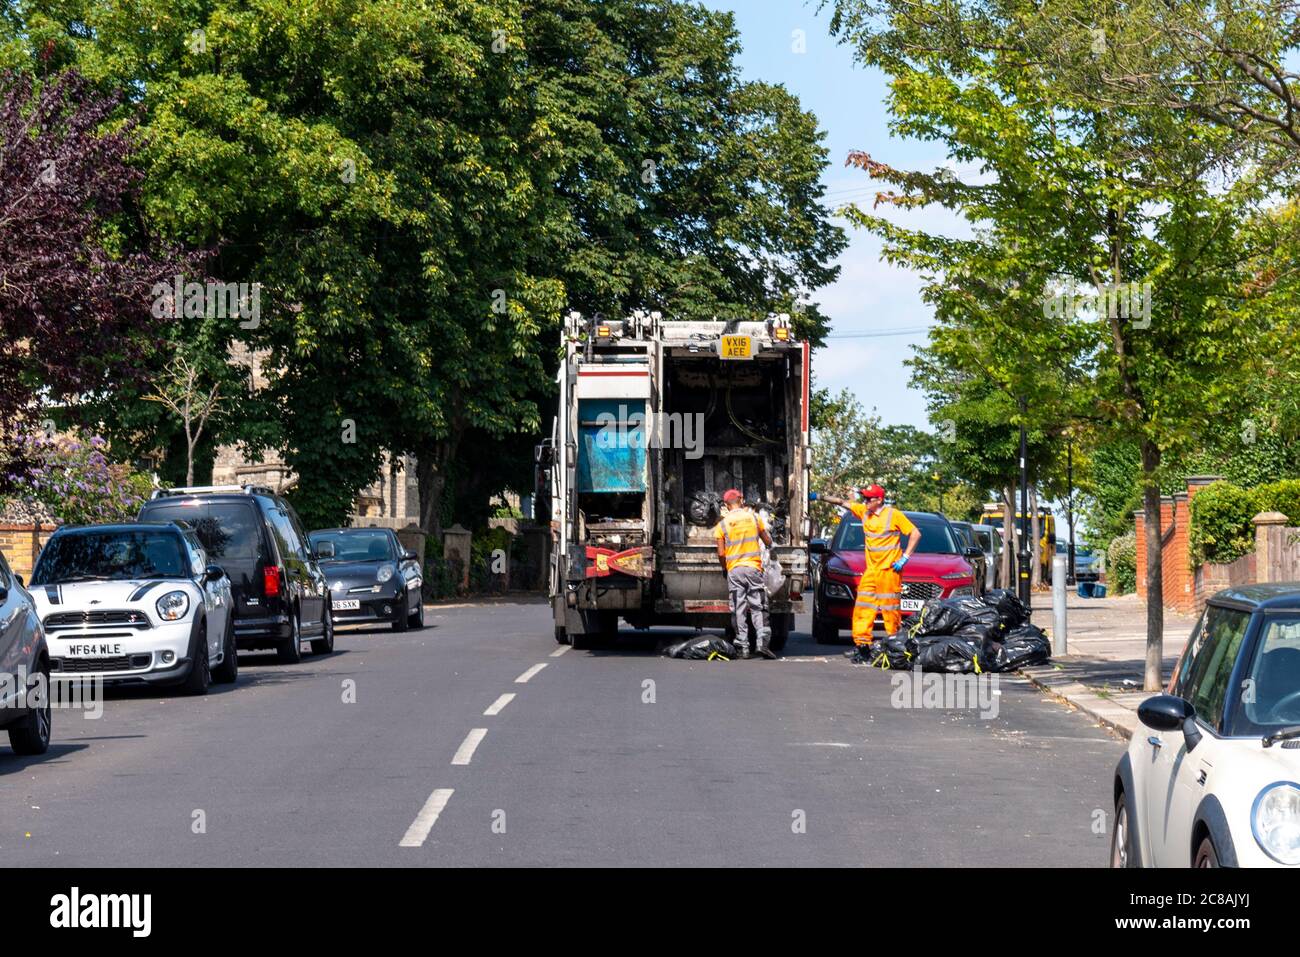 Southend on Sea Borough Council refuse truck in Westcliff on Sea, Southend, Essex, UK. Veolia Environmental Services. Dropped mess on road. Bin bags Stock Photo